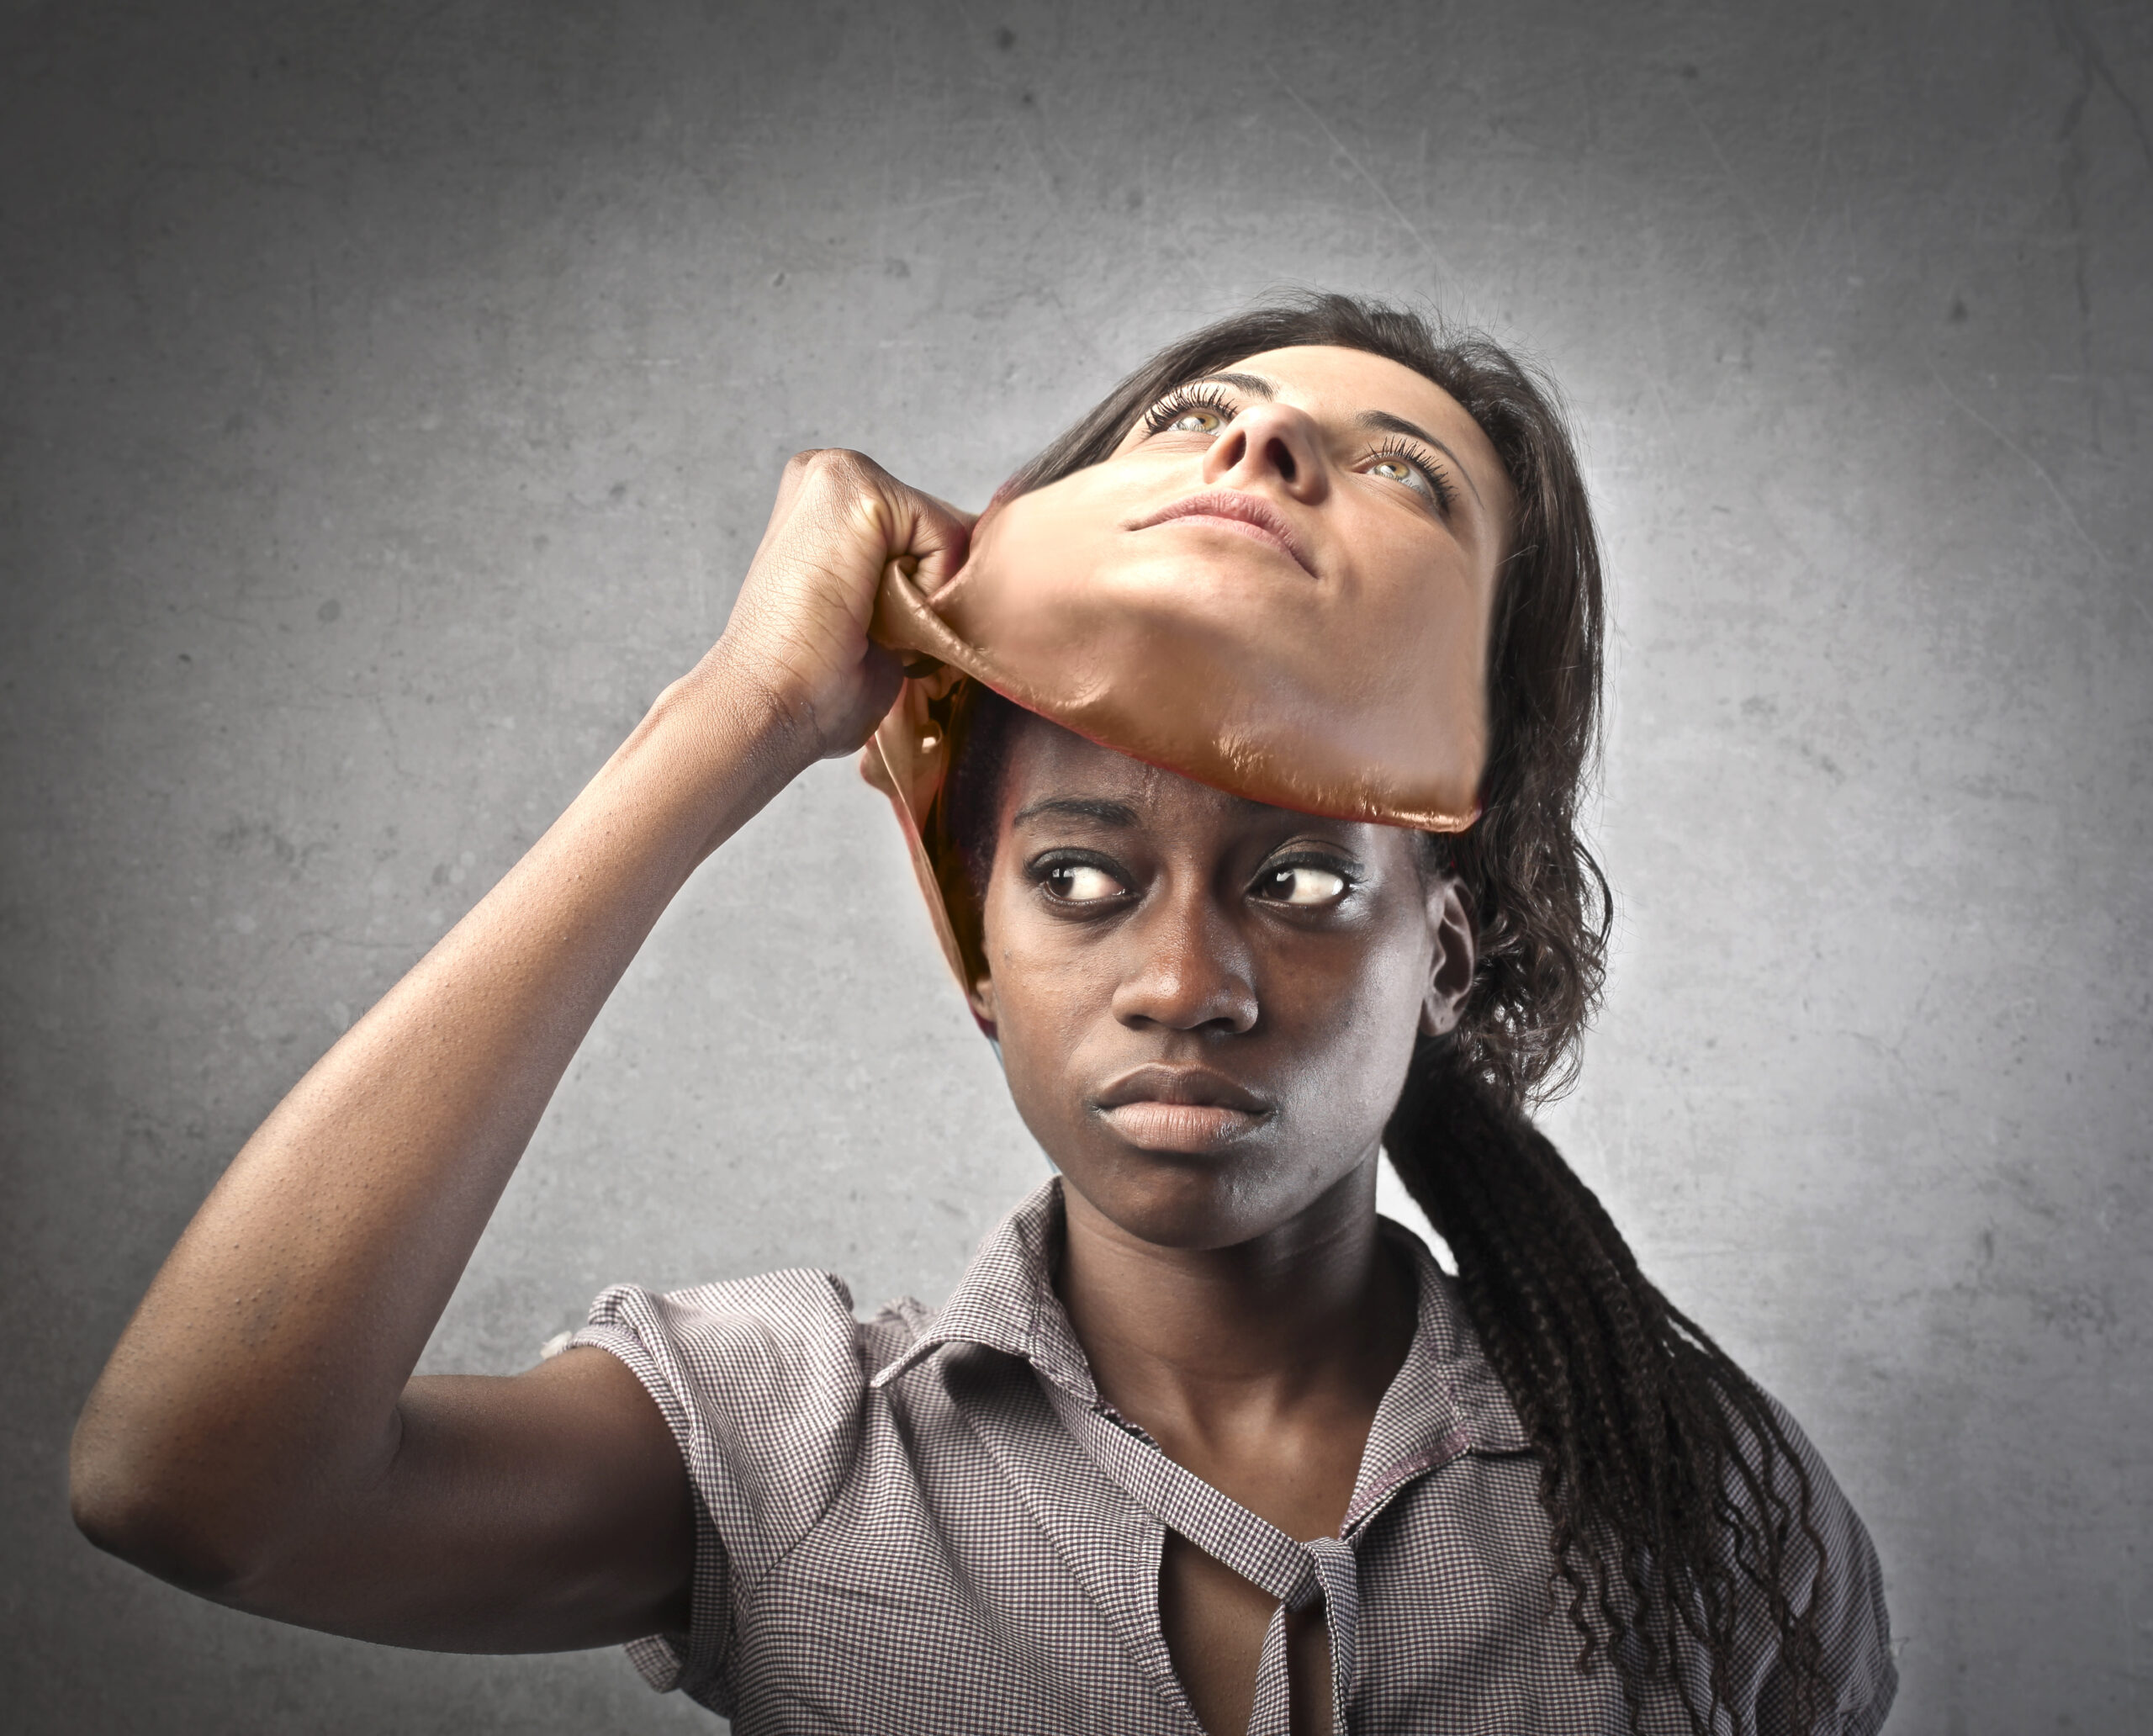 An African-American woman peels off a mask of a white woman, demonstrating code-switching as the result of racial or cultural bias.